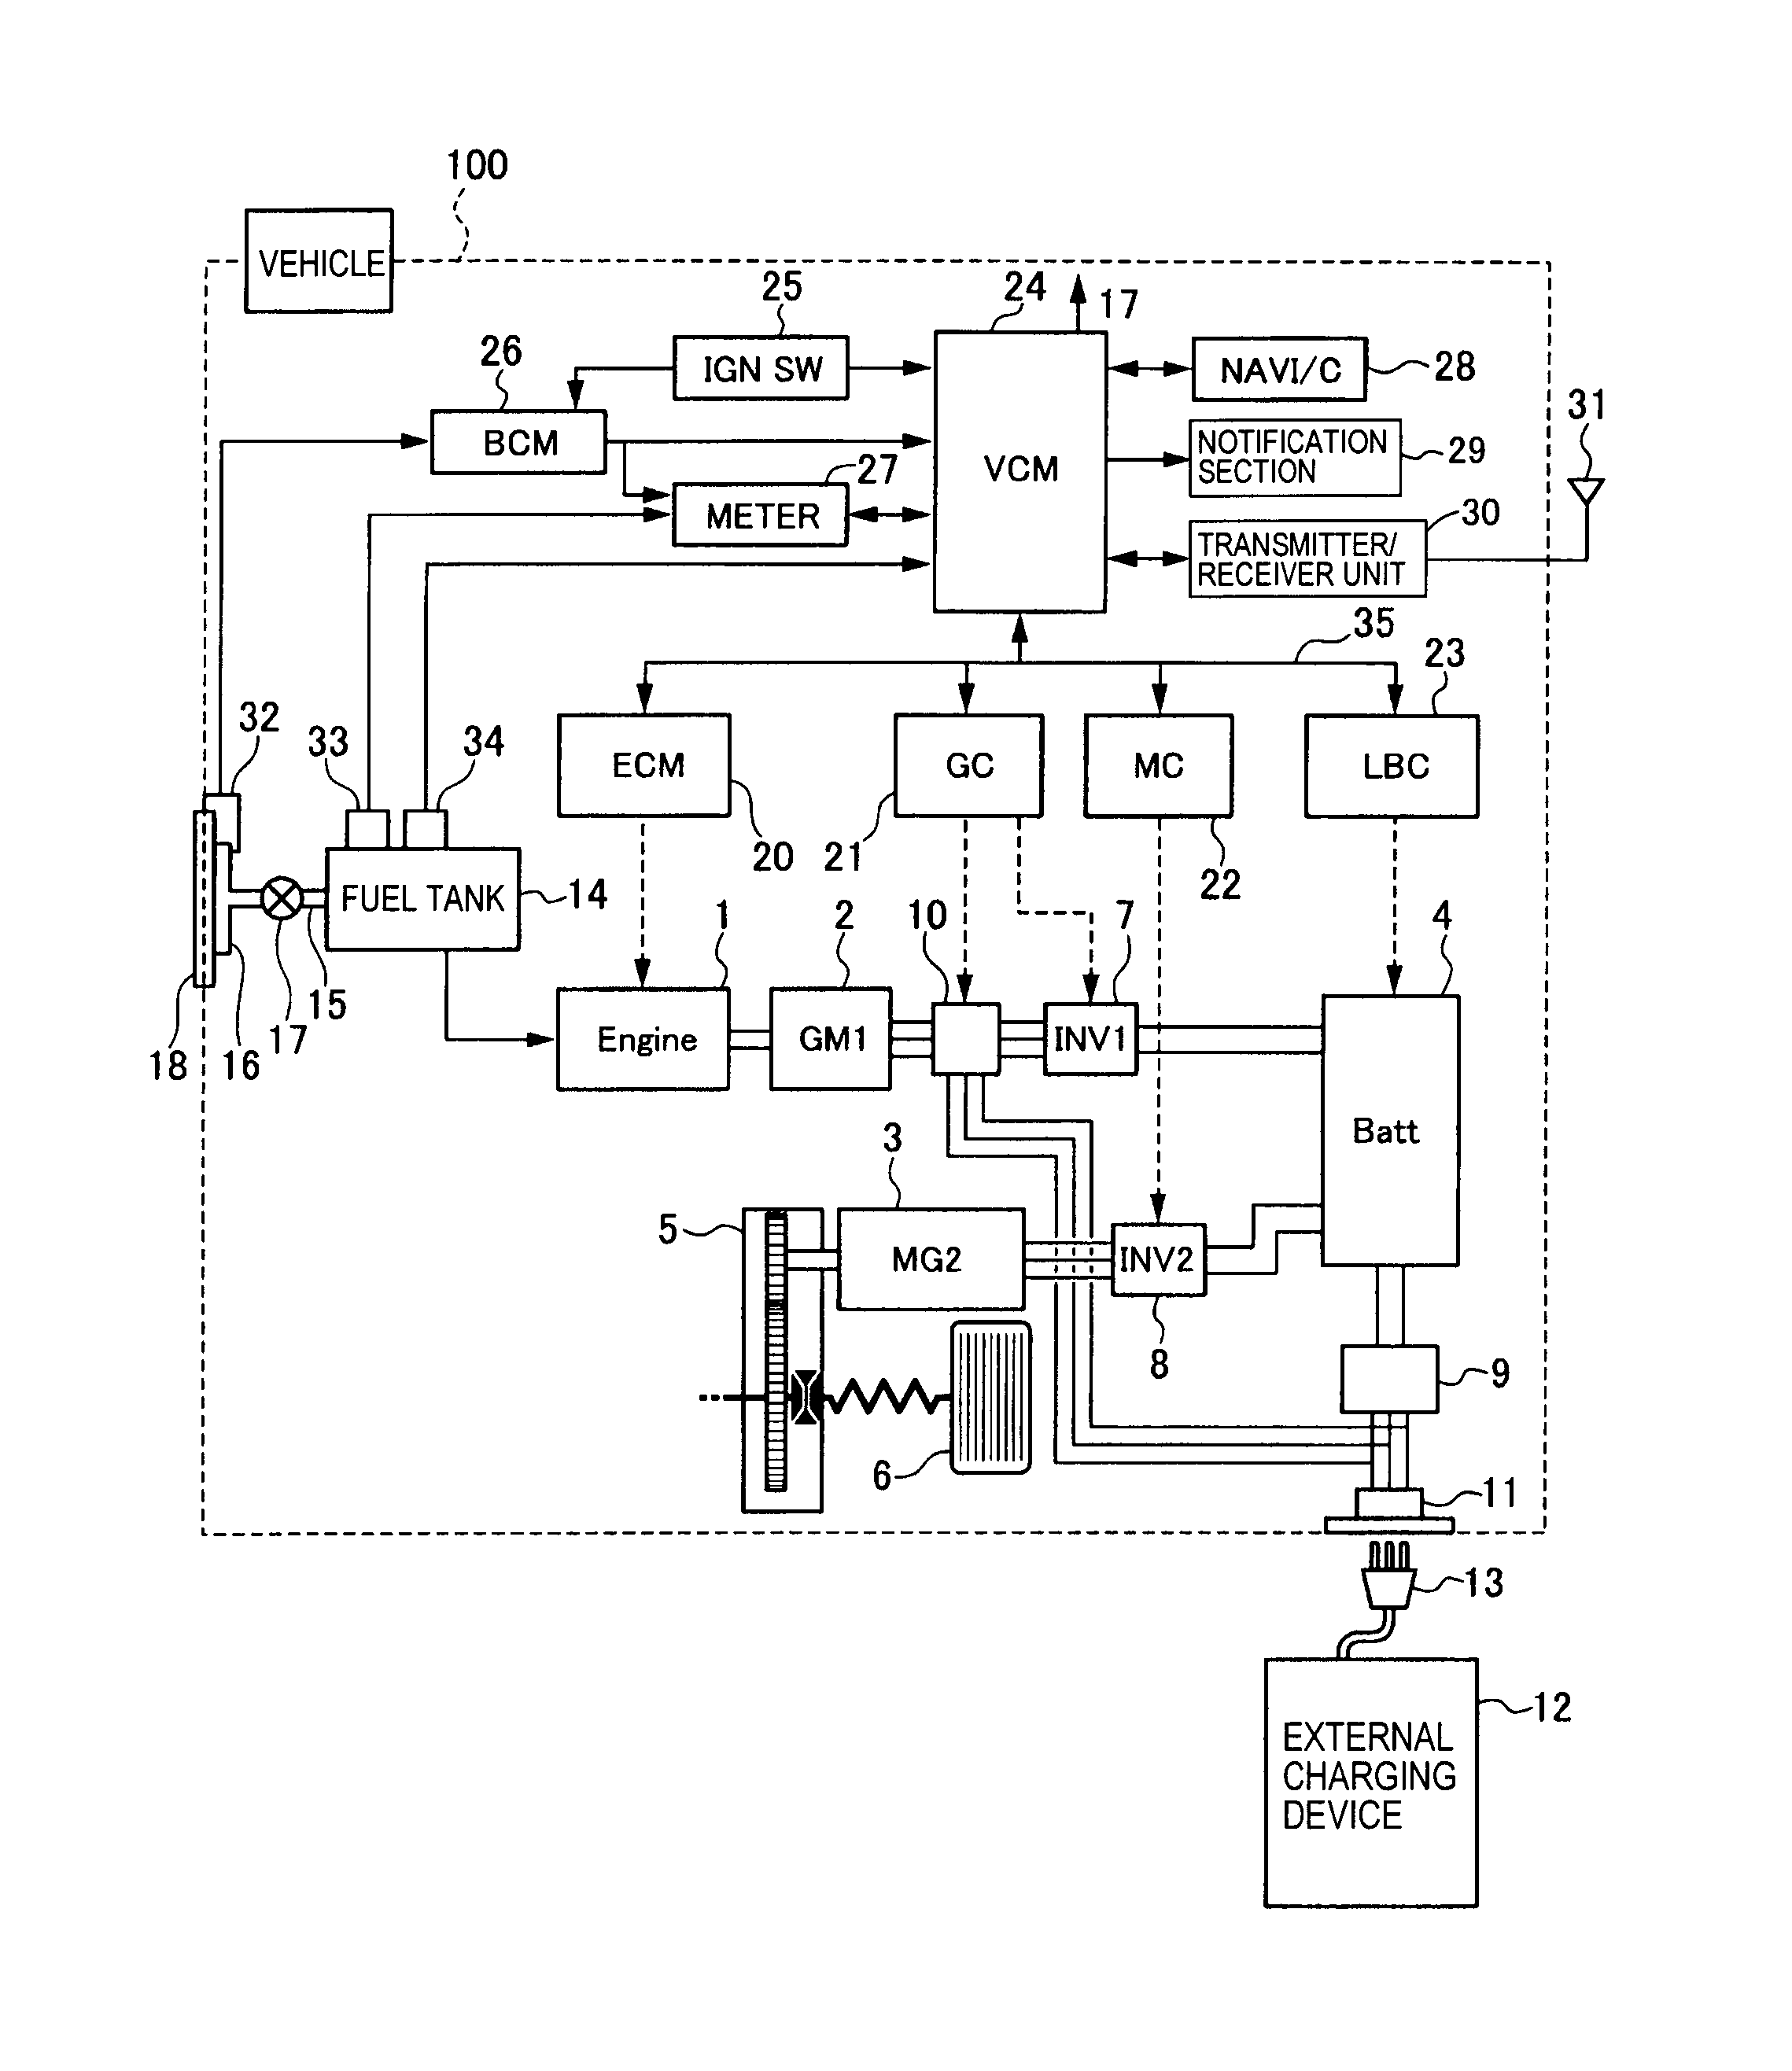 wiring diagram for a starter controlling a 480v motor with 120v start/stop button